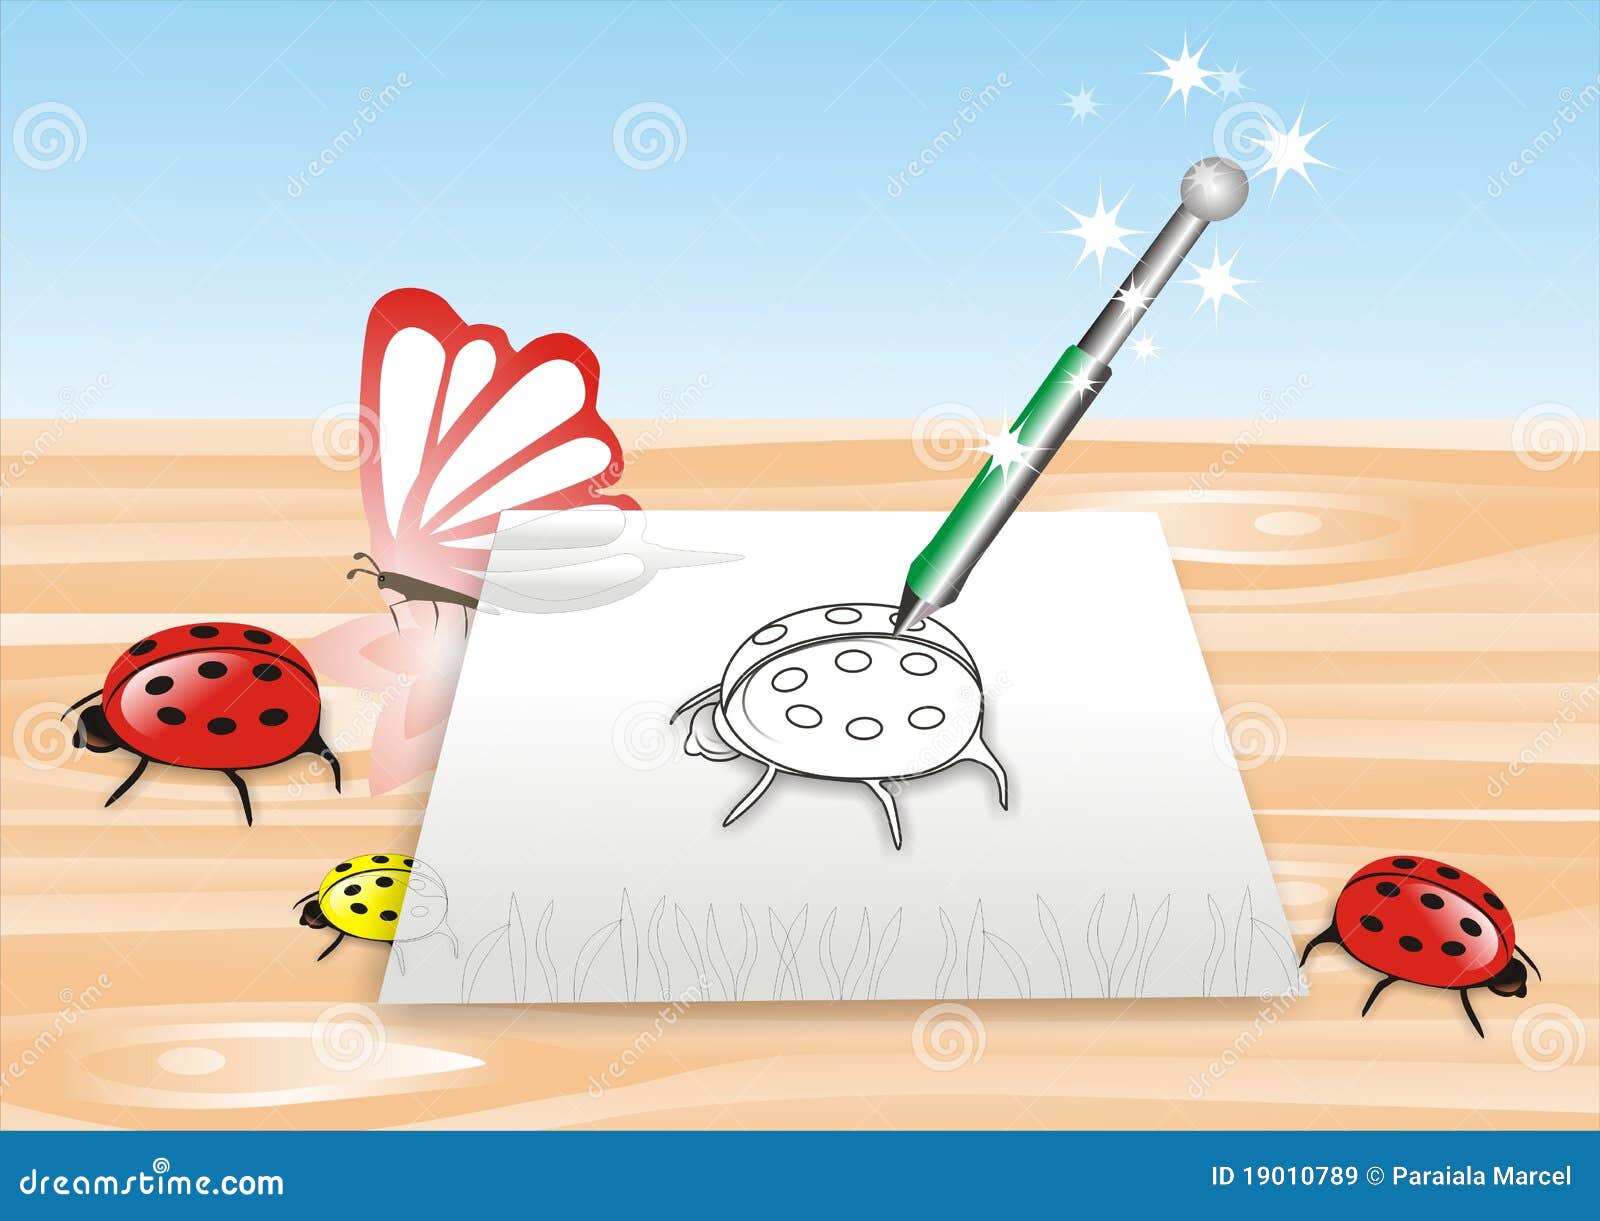 Magic pencil stock vector. Illustration of process, butterfly - 19010789